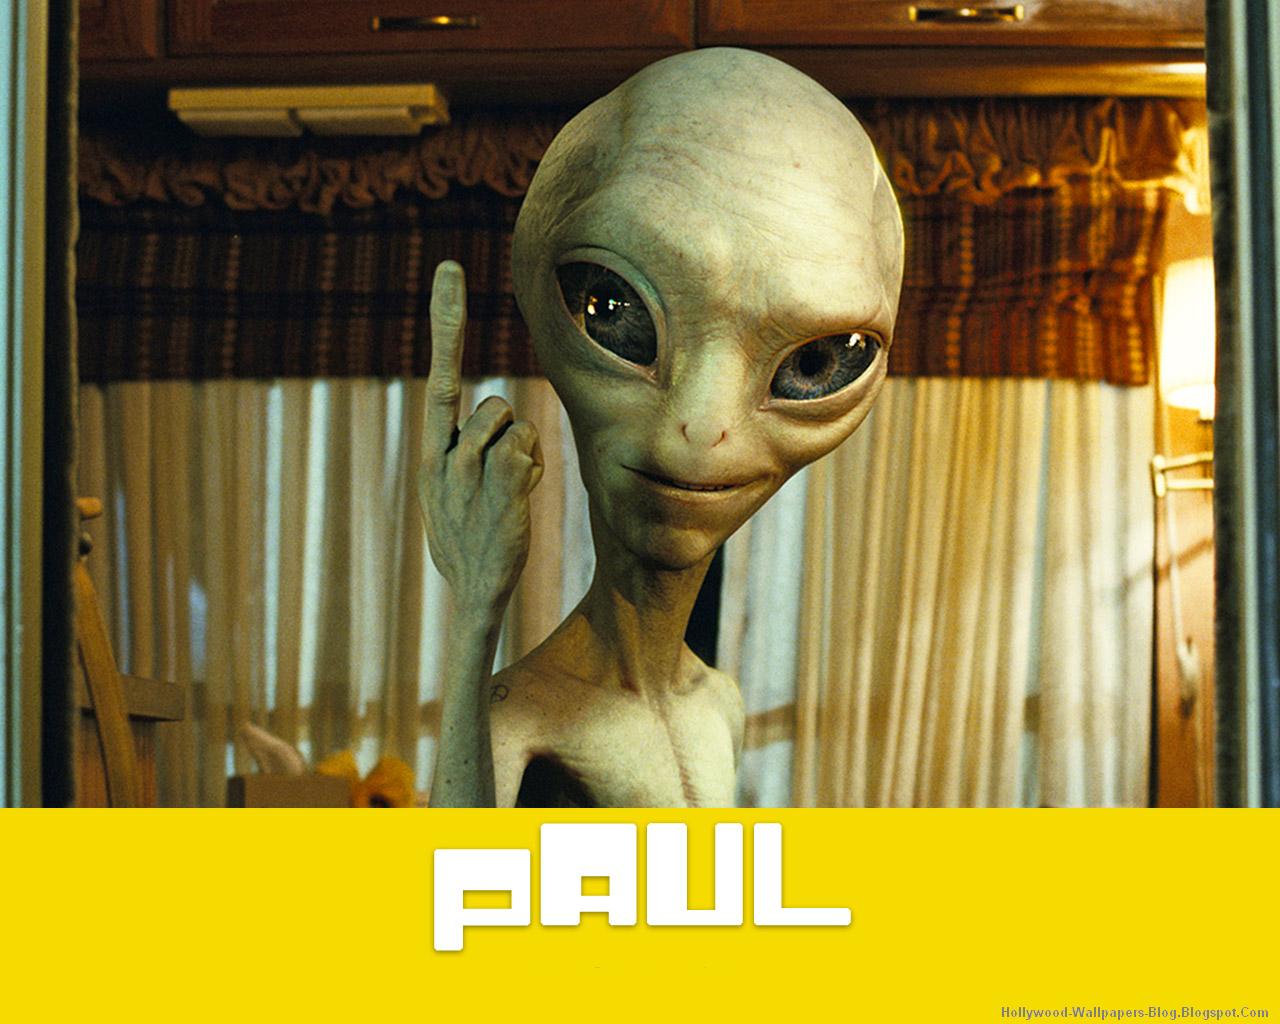 Hollywood Wallpapers Paul Movie Wallpapers